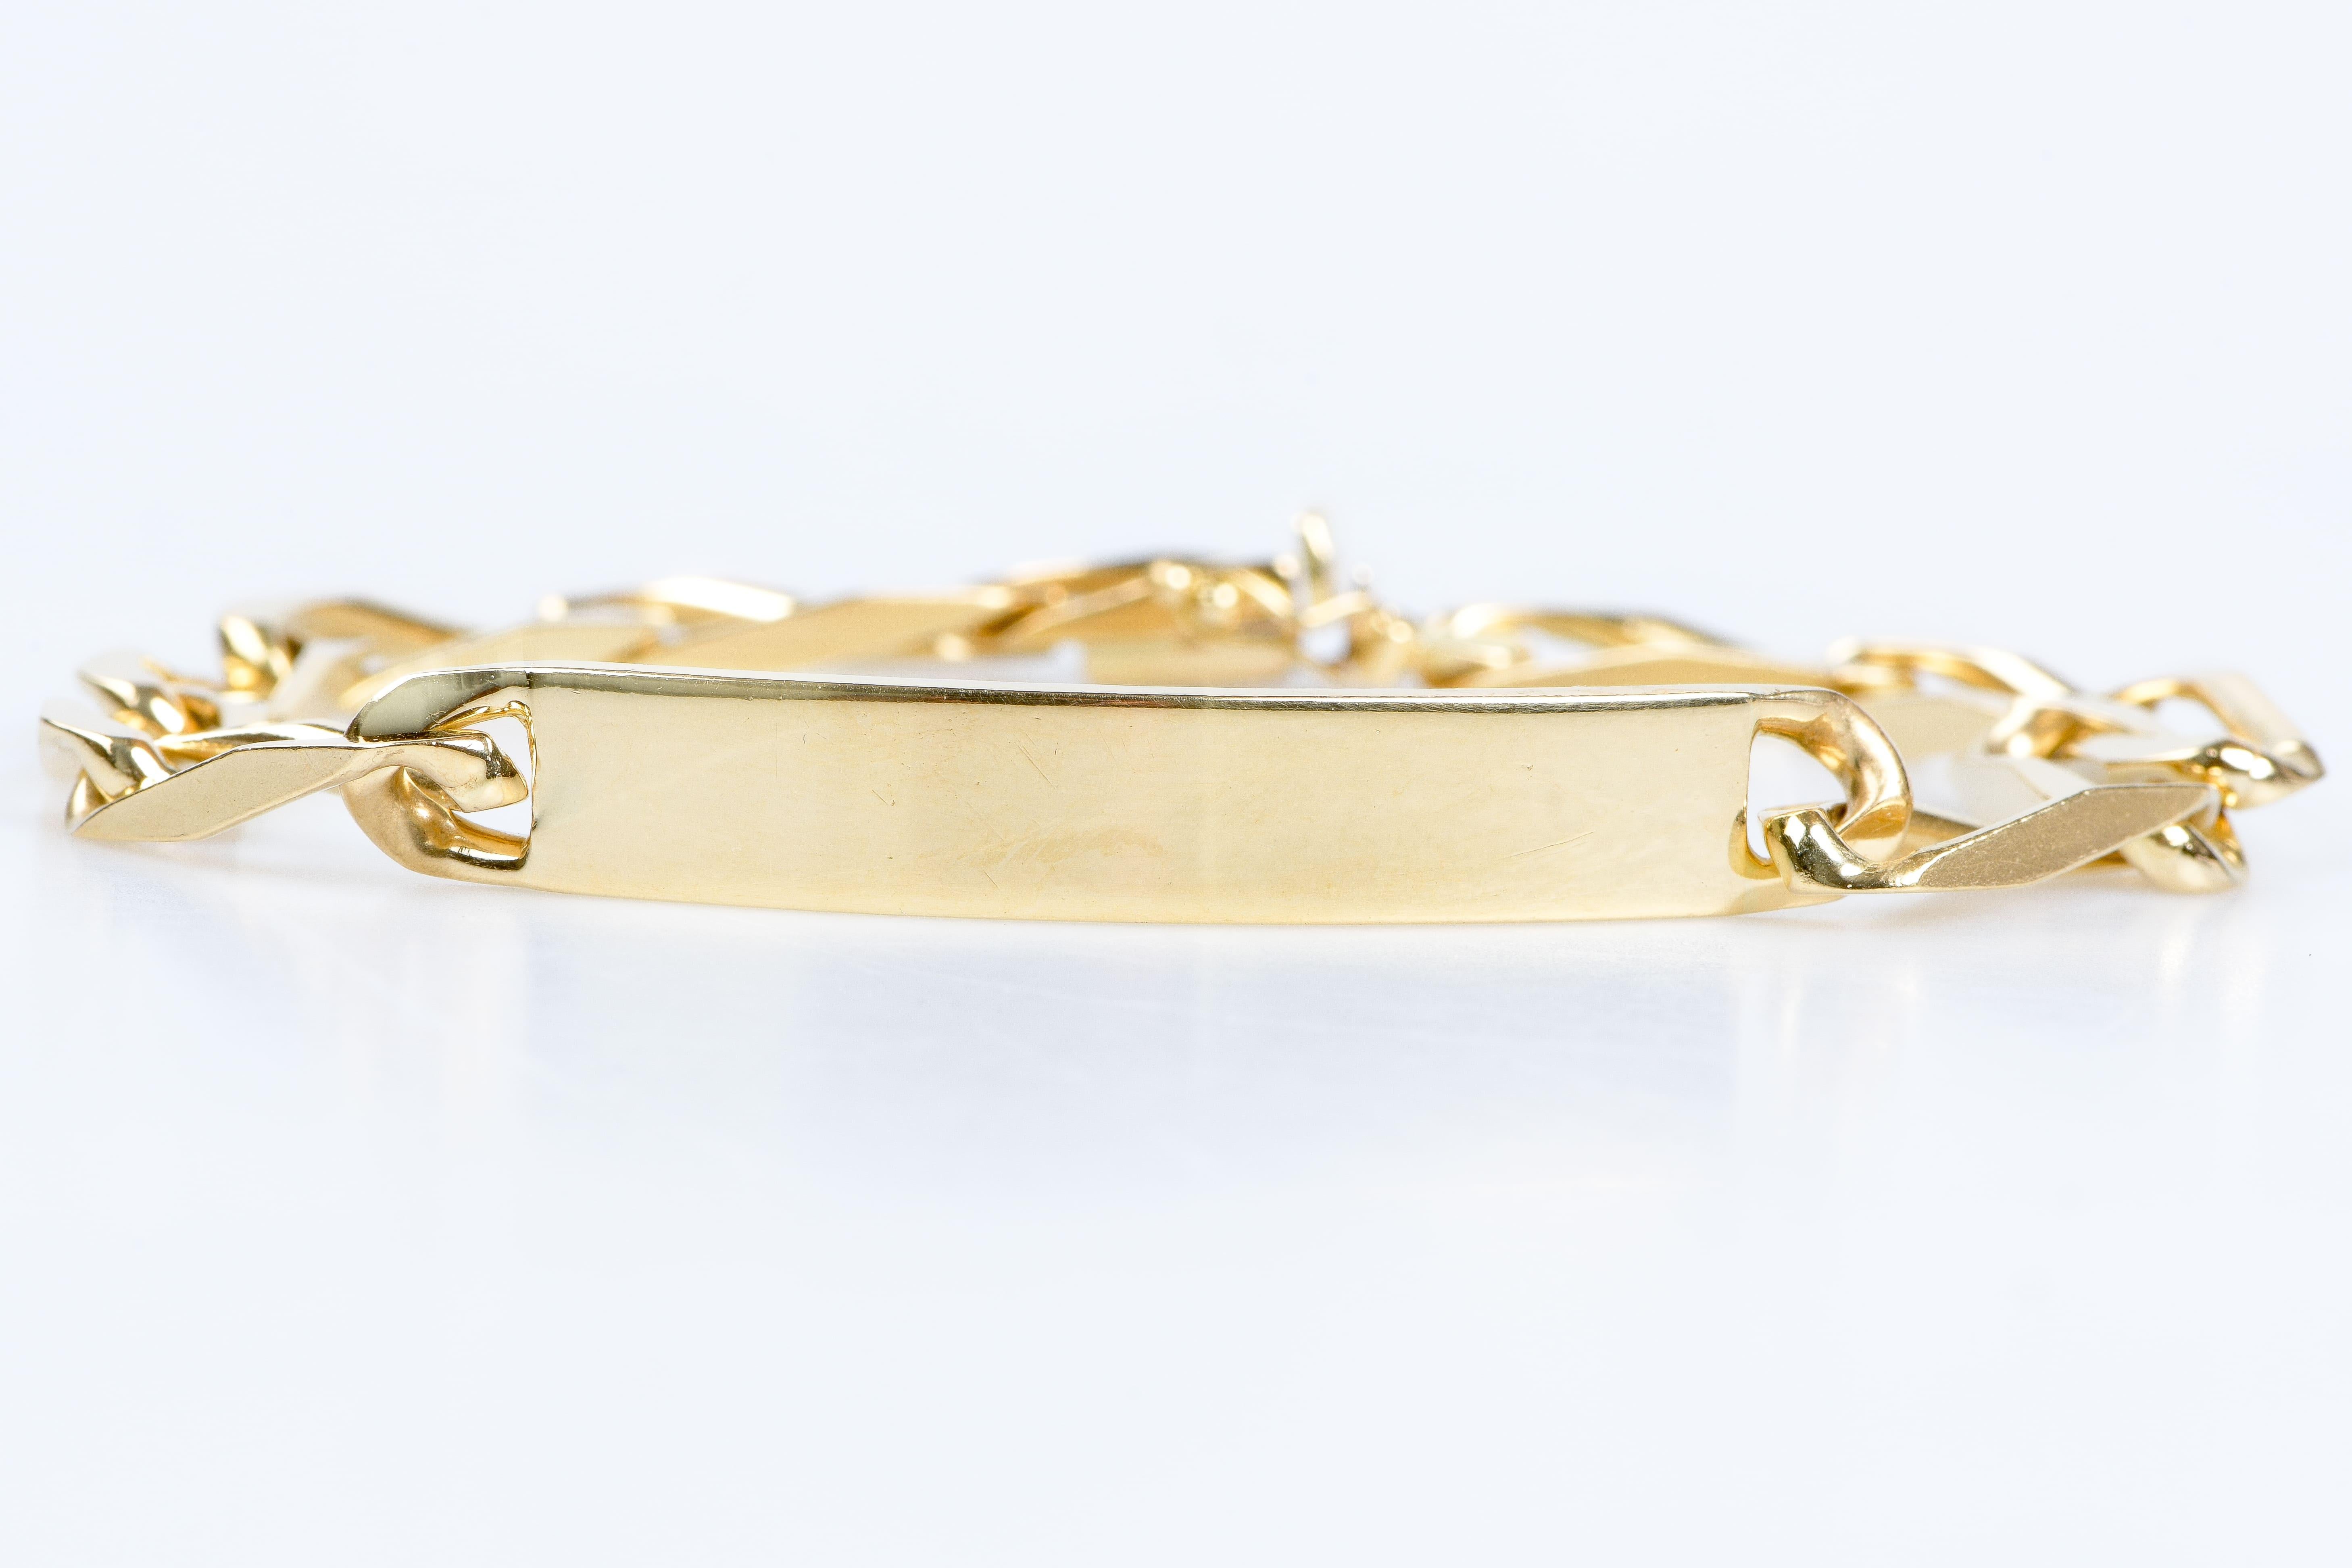 Men’s 18 carat yellow gold bracelet in chain link mesh.  It is a timeless jewel that can be personalised or left blank.  It is very suitable to add a touch of light to a daily outfit.

Weight: 29.3 gr 

Dimensions: 22 cm x 0.7cm x 0.2

Gold mark on